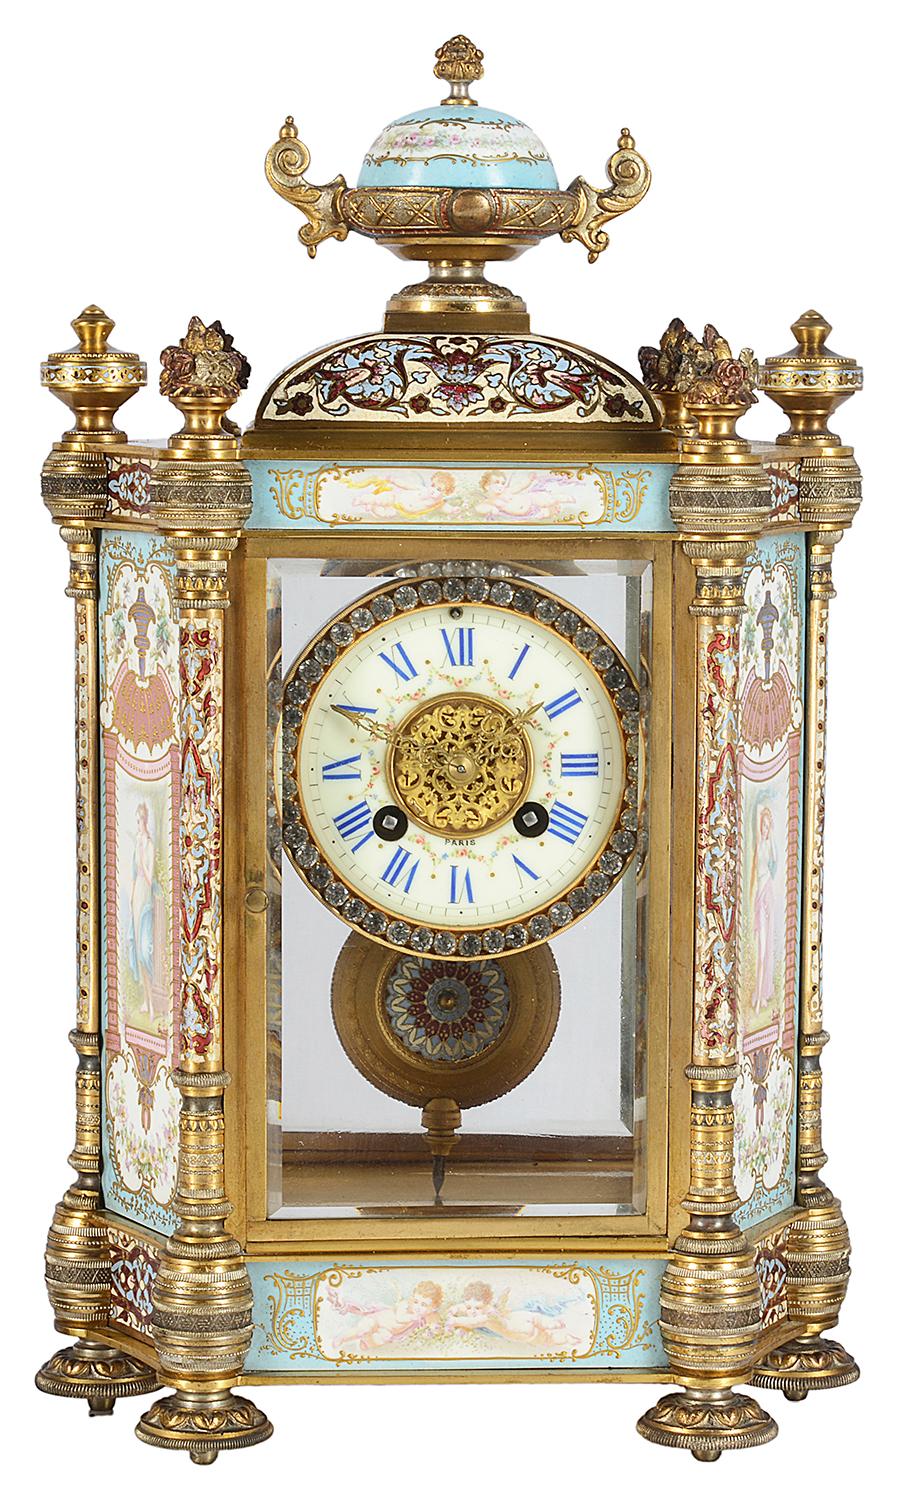 A very good quality late 19th Century French champlevé enamel and porcelain clock garniture, set in a gilded ormolu case, the porcelain panels to the clock and urns depicting classical maidens in the gardens, signed 'Collet', four enamel columns